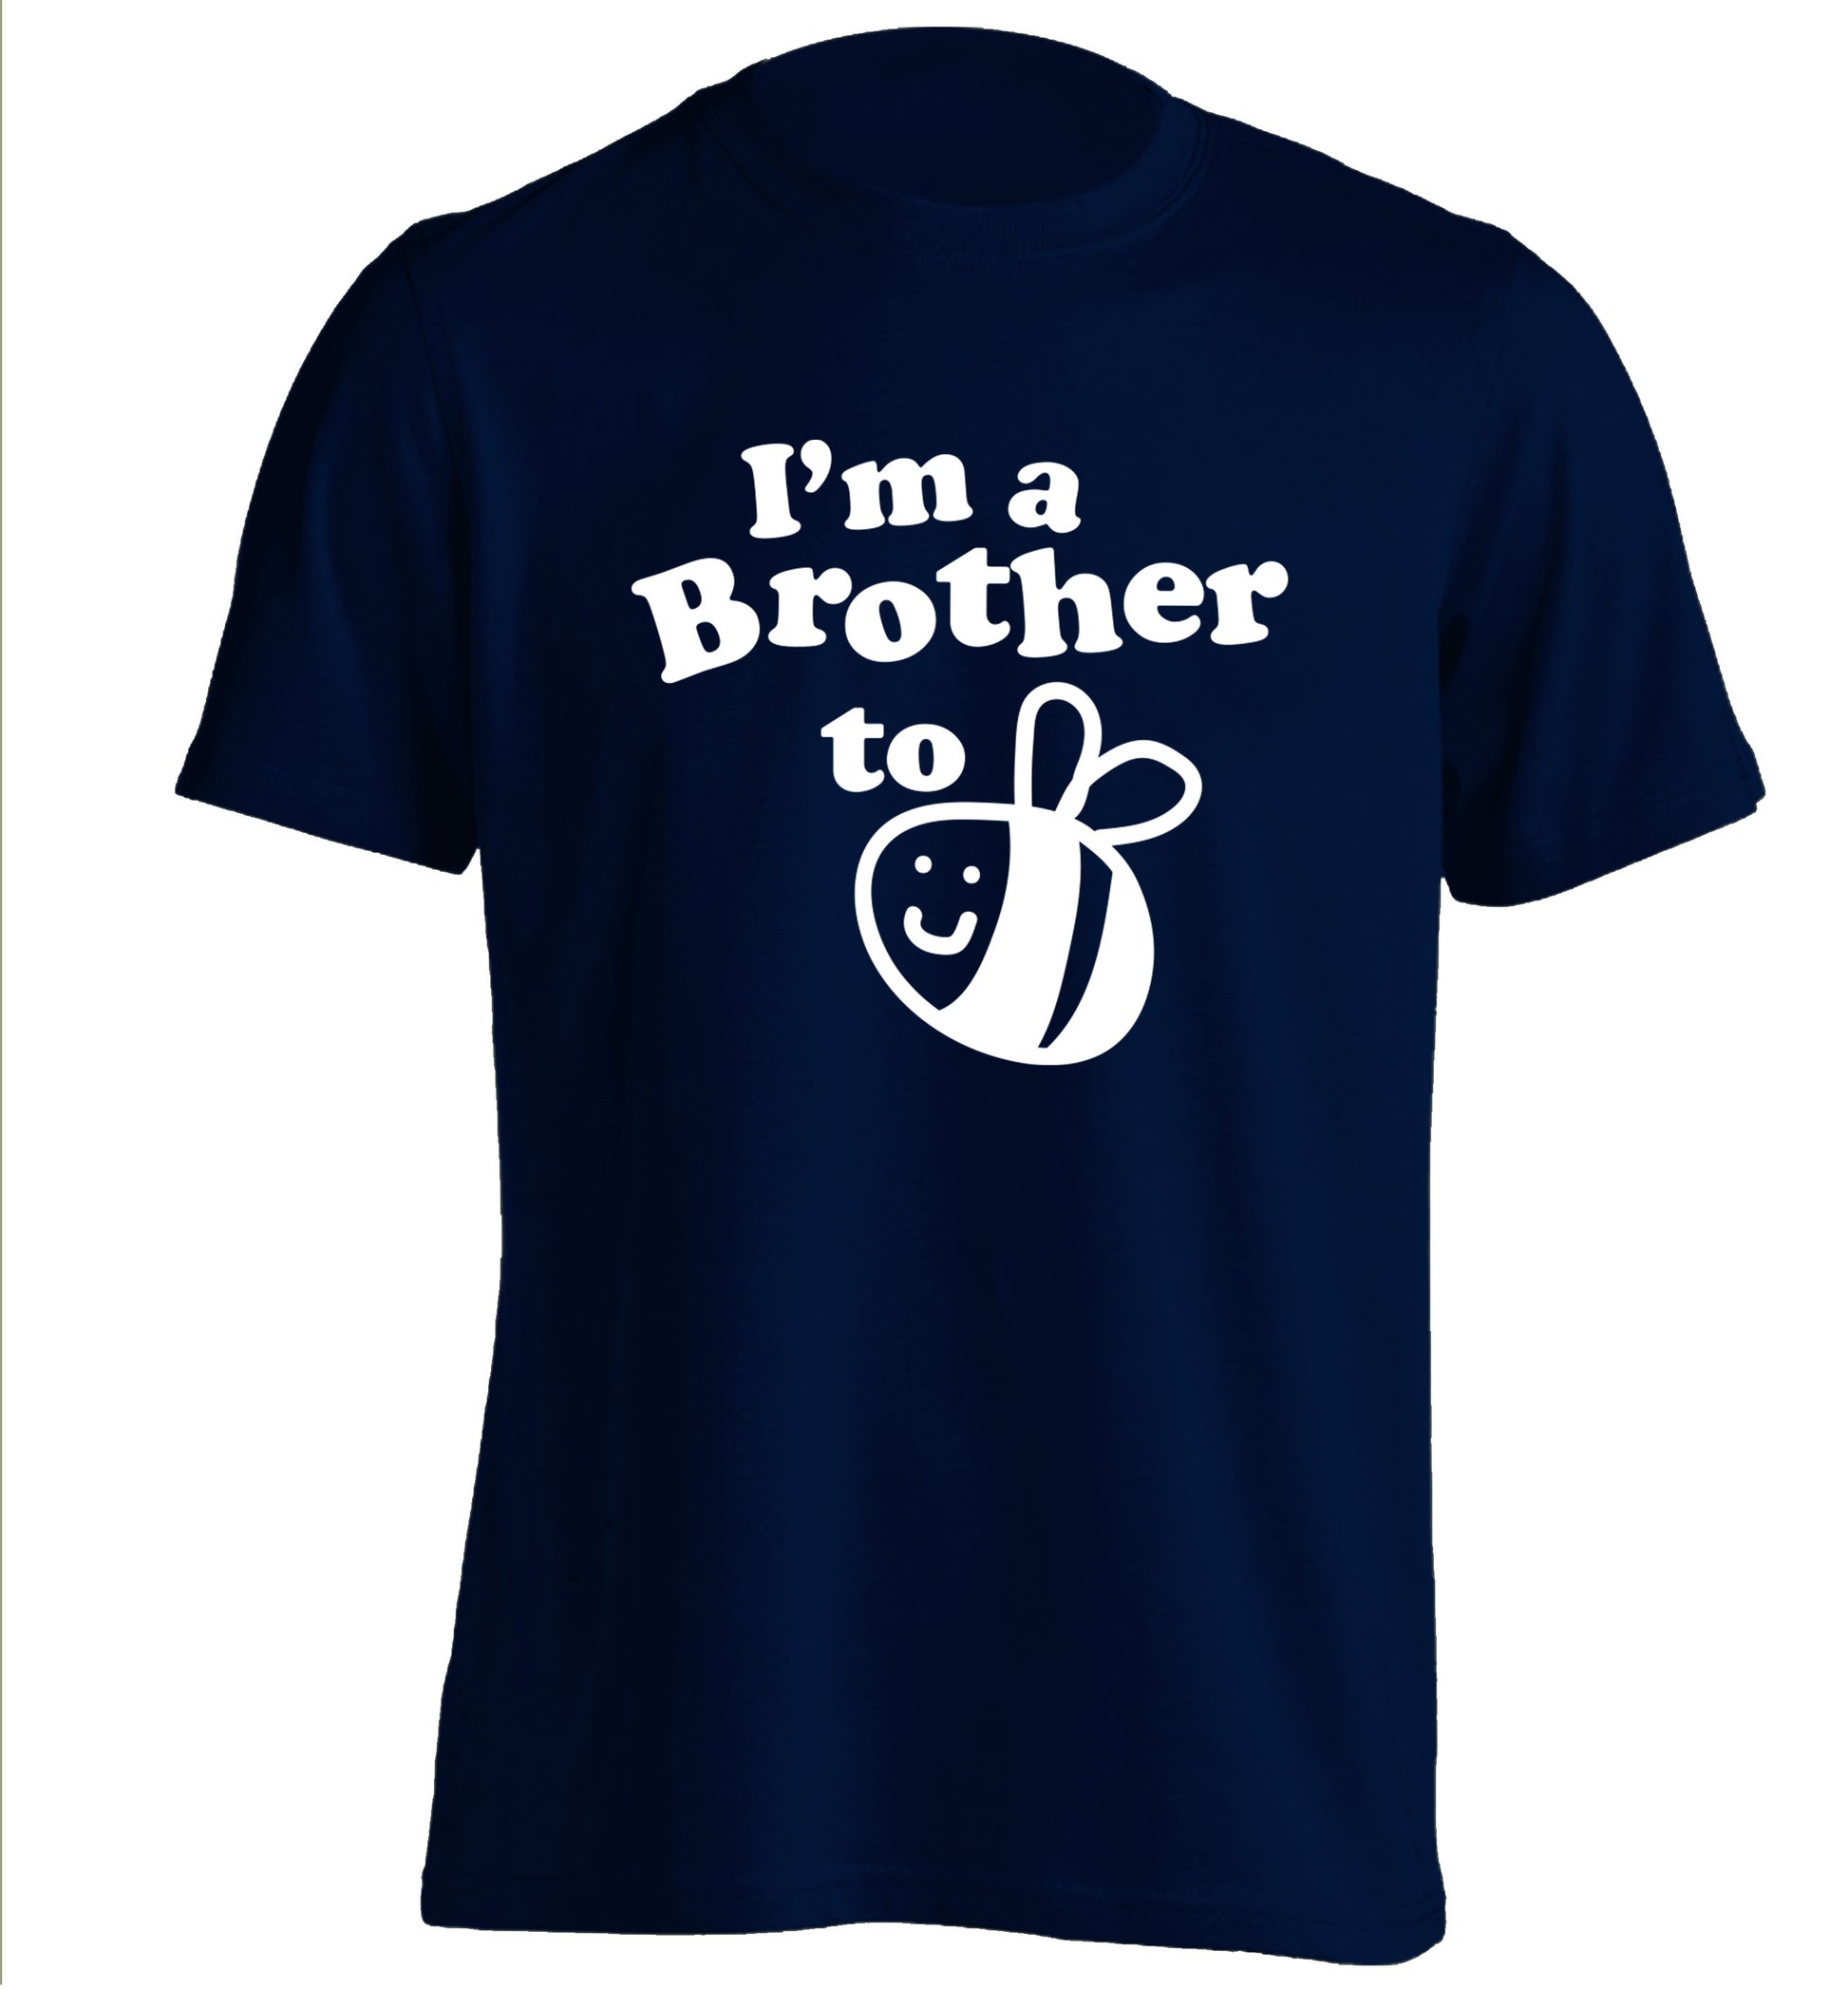 I'm a brother to be adults unisex navy Tshirt 2XL